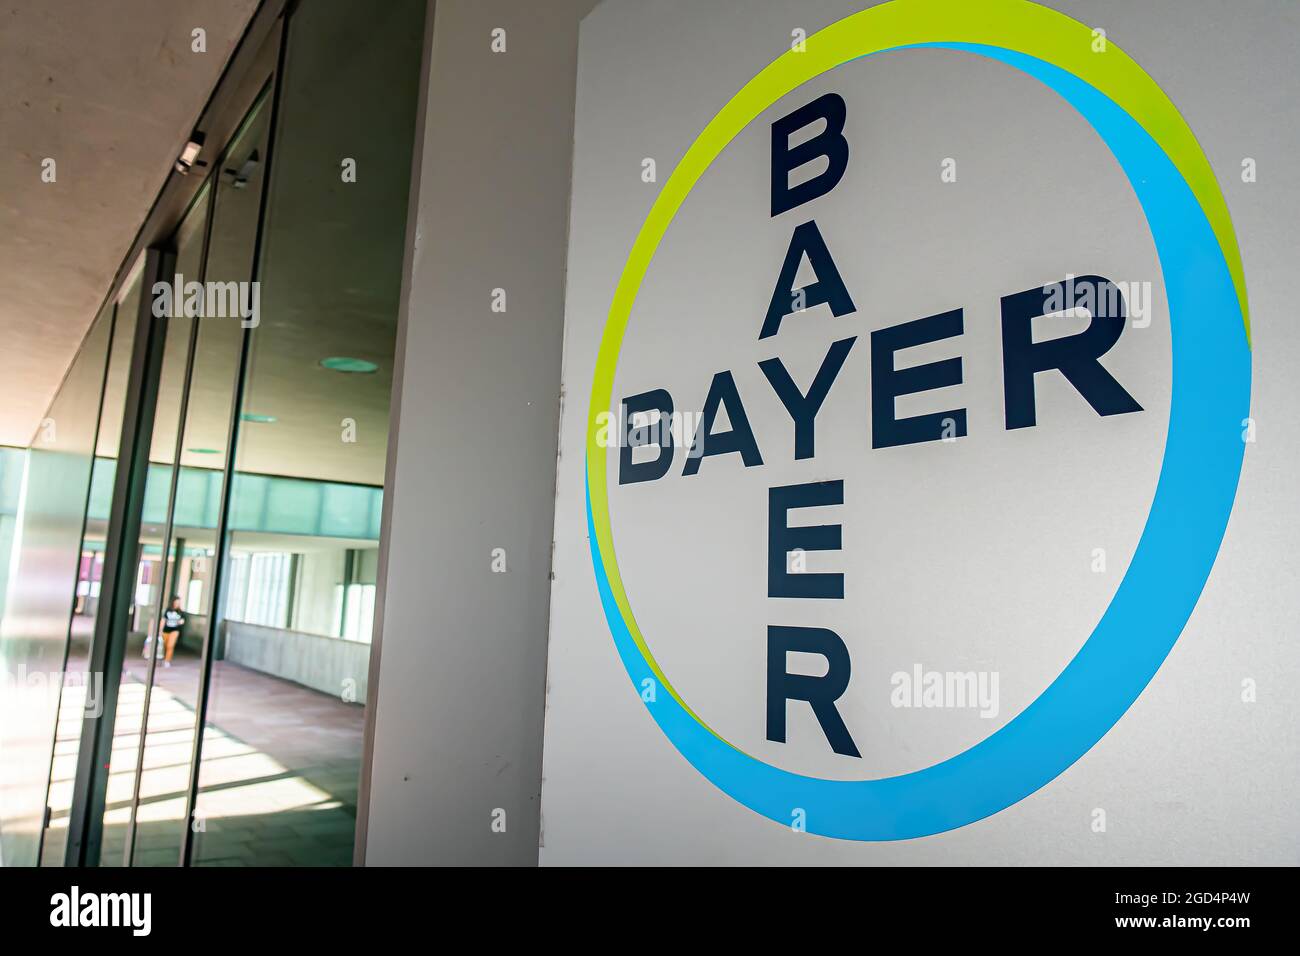 BASEL, SWITZERLAND - MARCH 15, 2020: Bayer AG is a German multinational pharmaceutical and life sciences company and one of the largest pharmaceutical Stock Photo